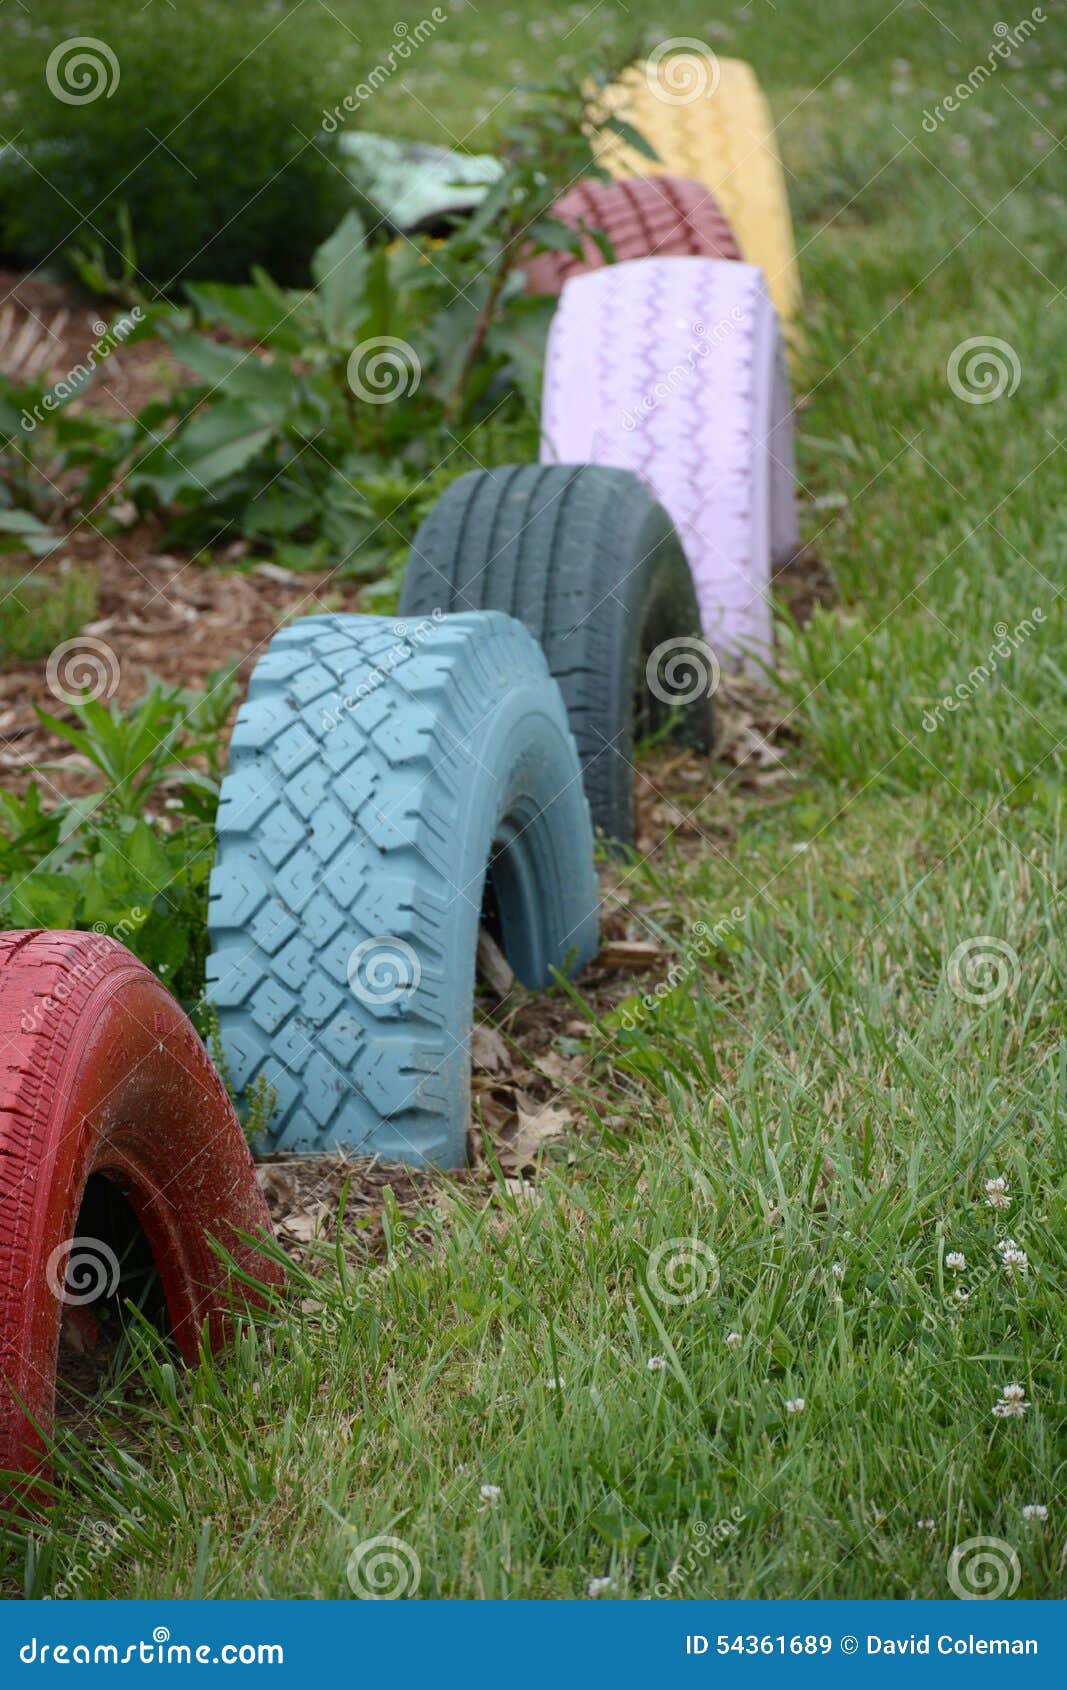 Painted Tires Stock Image Image Of Tires Radial Colorful 54361689